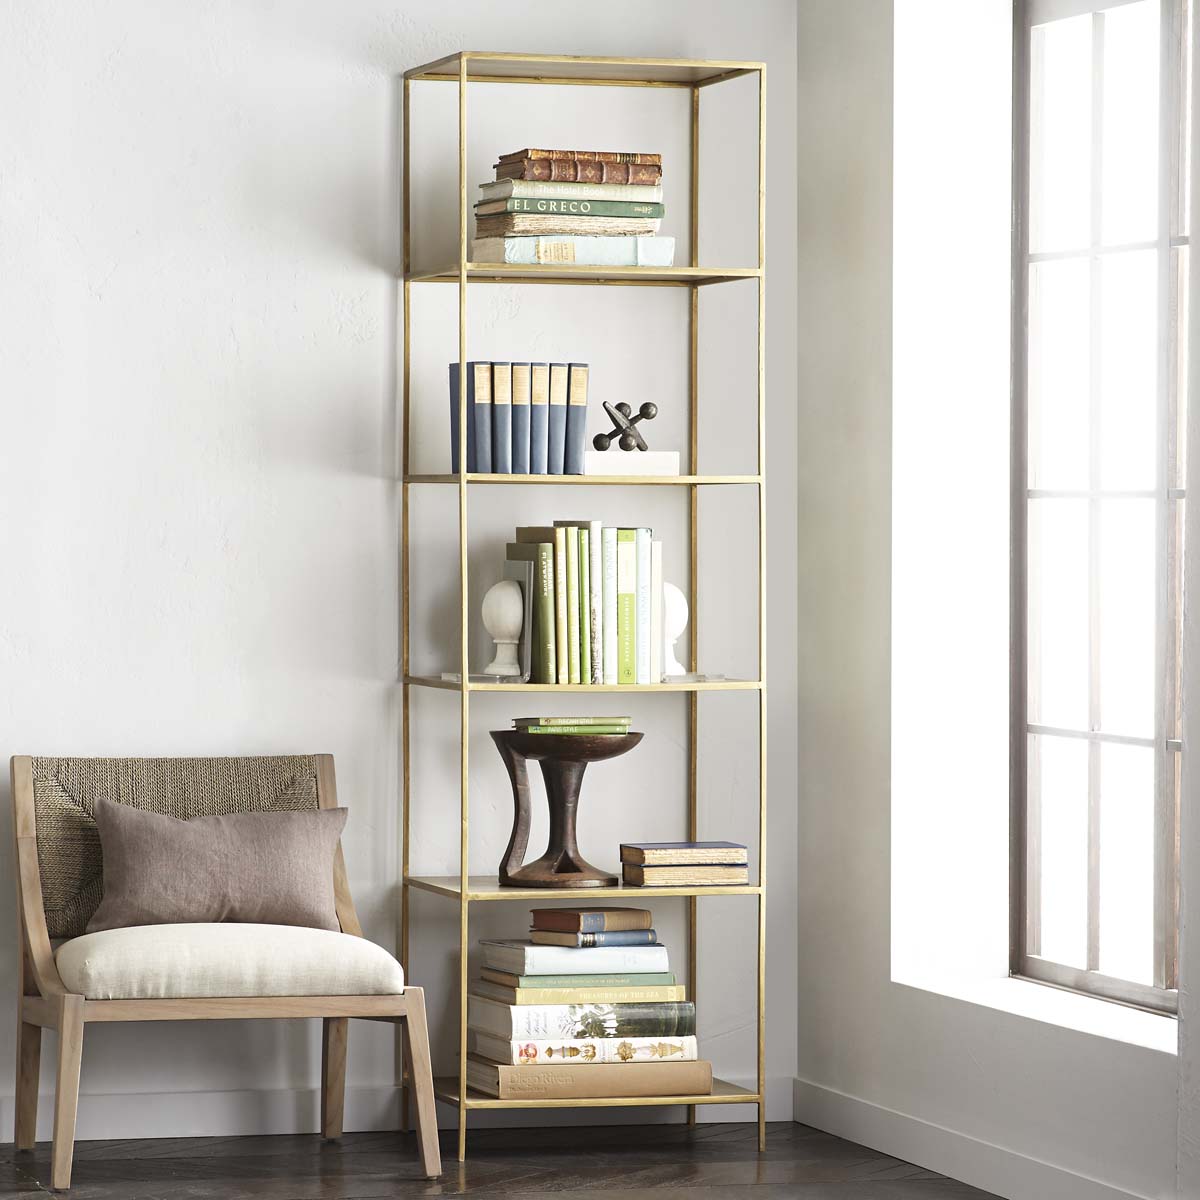 Tower Bookshelf positioned beside a chair in a room